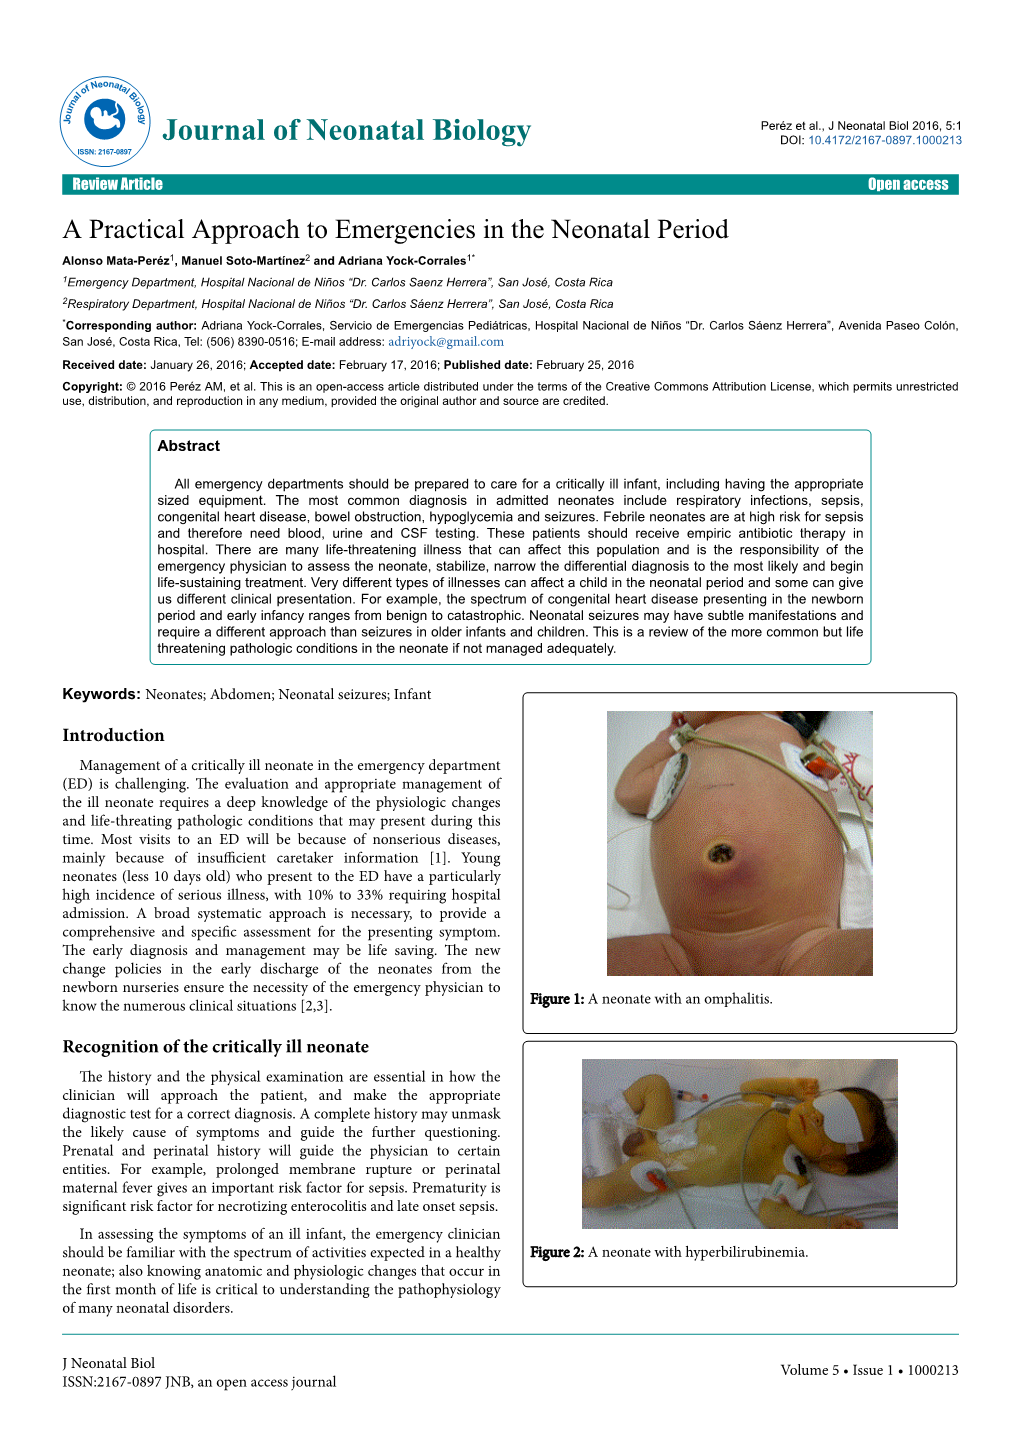 A Practical Approach to Emergencies in the Neonatal Period